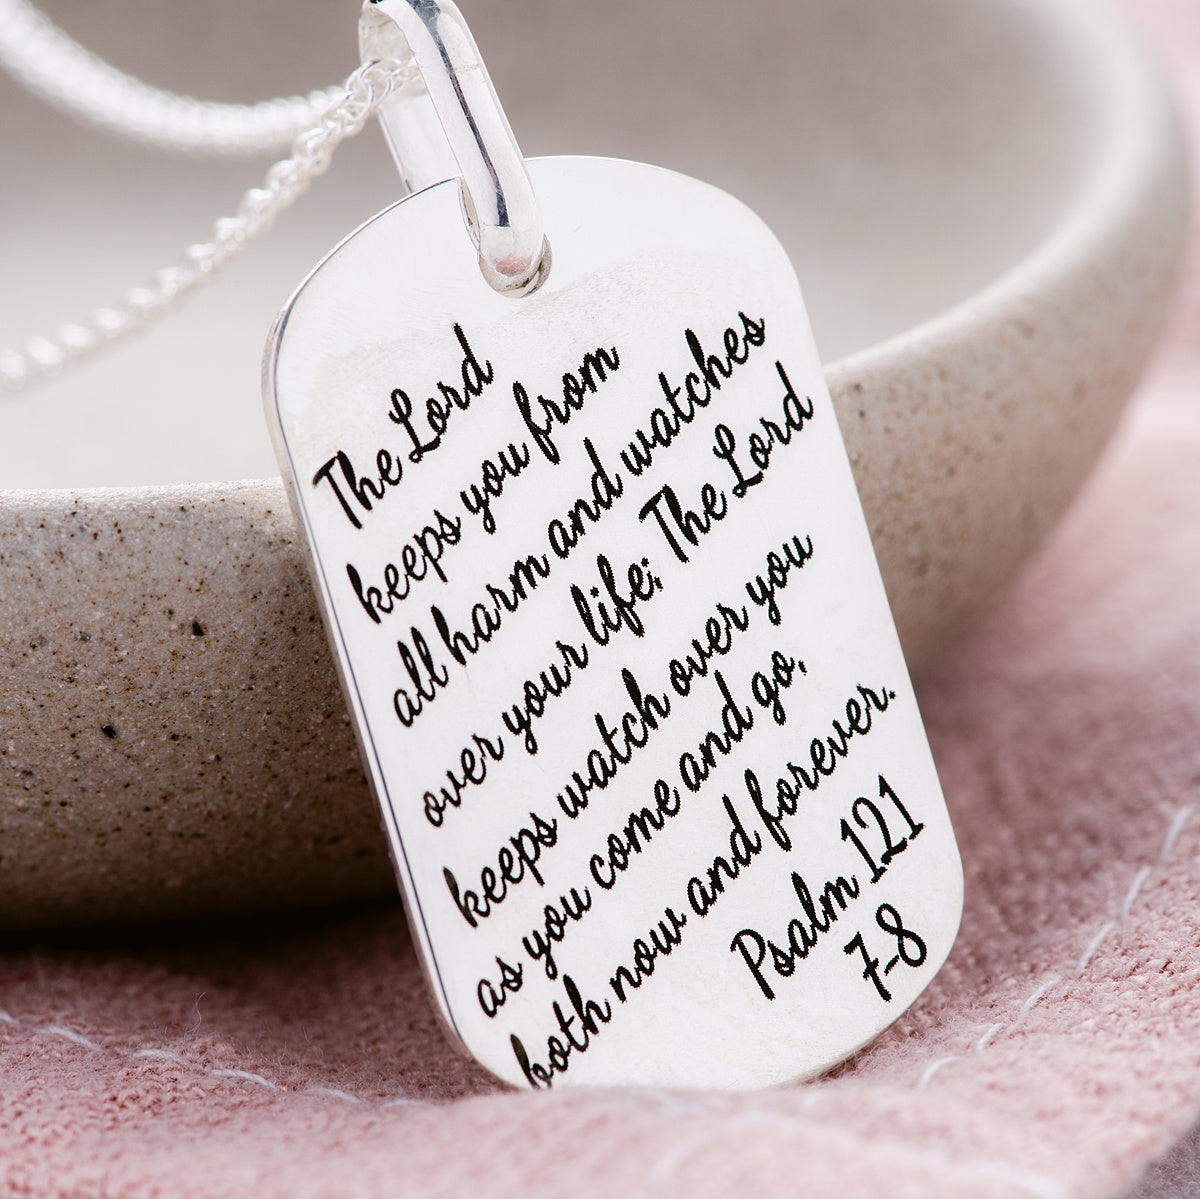 Sterling Silver Dog Tag Pendant Necklace | Psalm 121:7-8 | The Lord Keeps You From All Harm